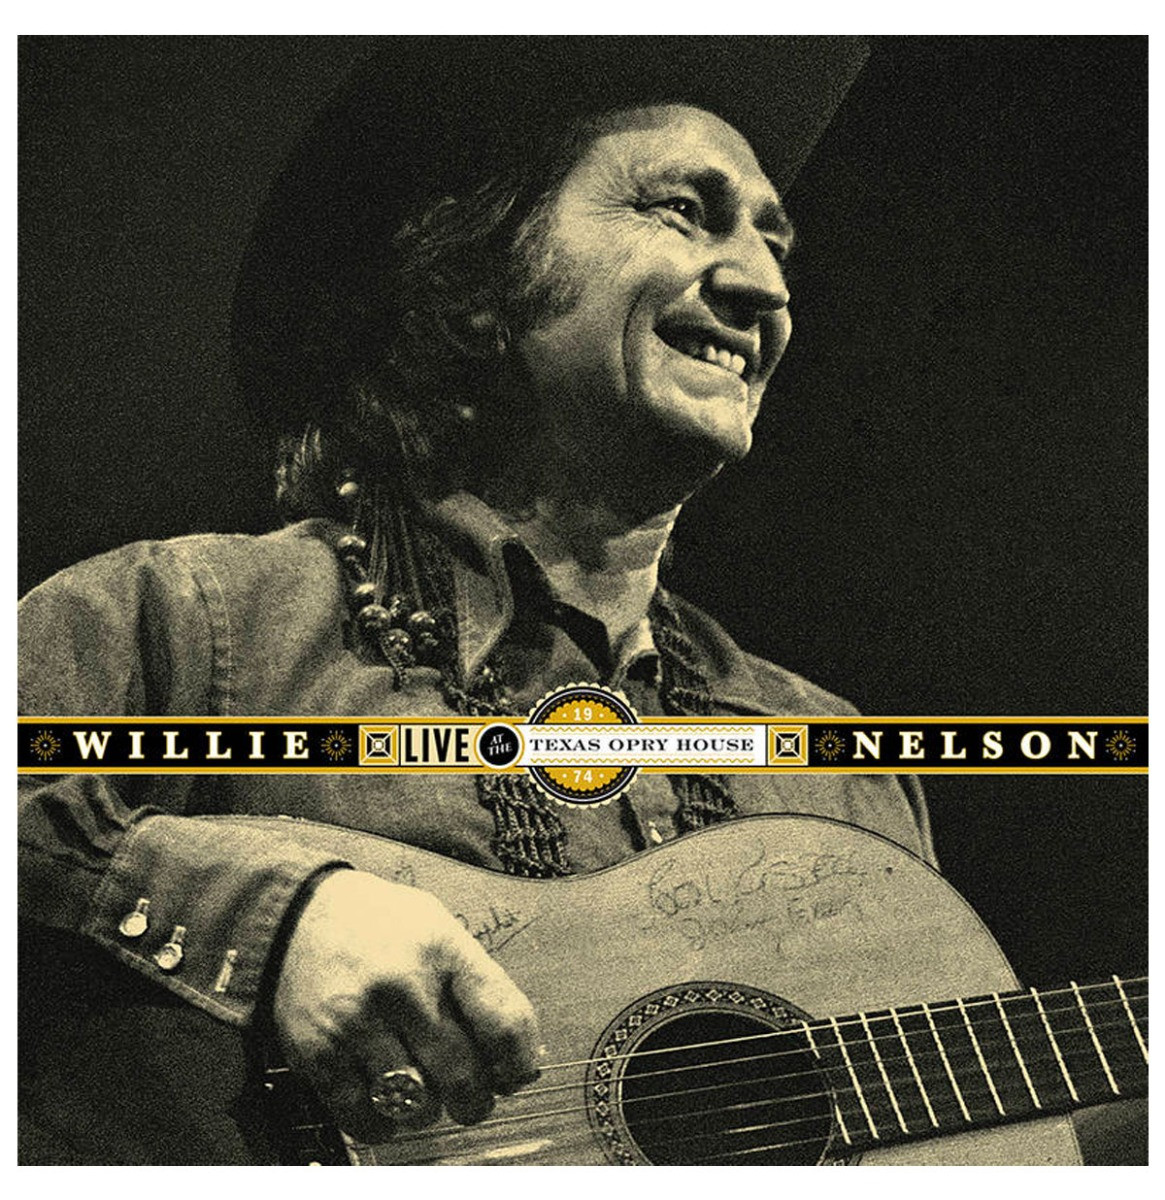 Willie Nelson - Live At The Texas Opry House, 1974 LP (Record Store Day 2022)